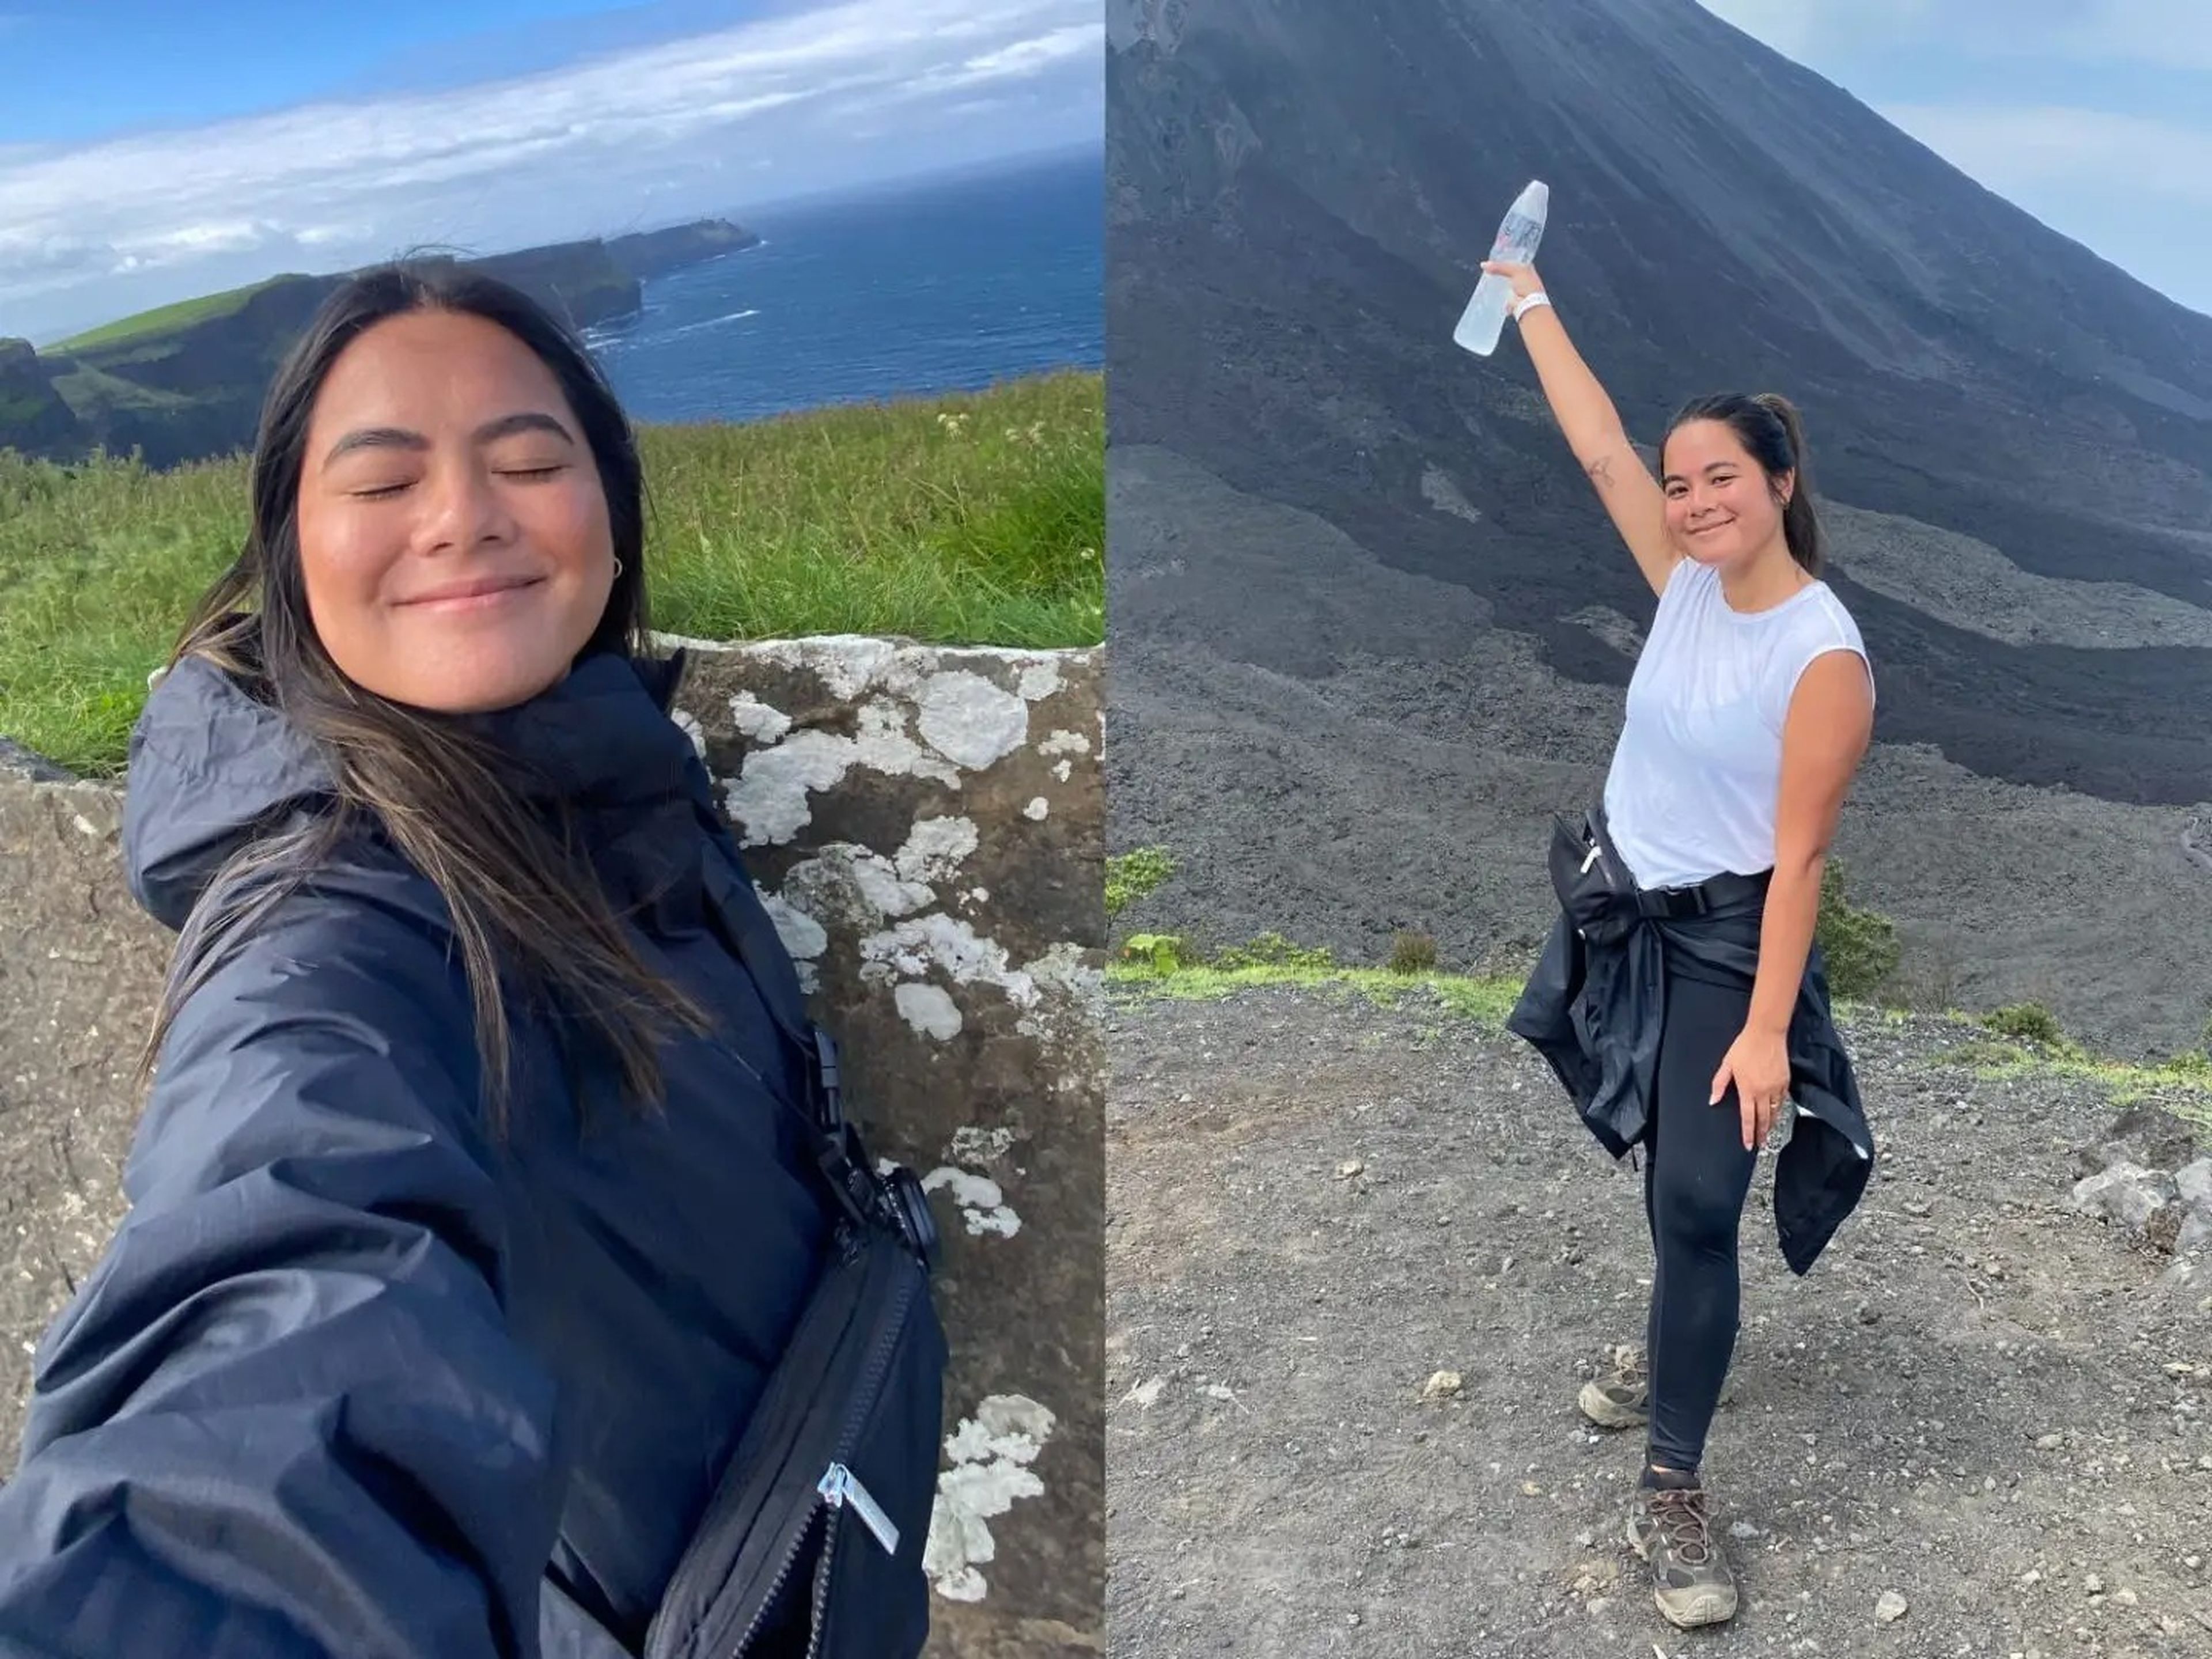 Two photos of the author traveling. On the left, she is taking a selfie at the Cliffs of Moher in Ireland. On the right, she is posing while hiking a volcano in Guatemala.